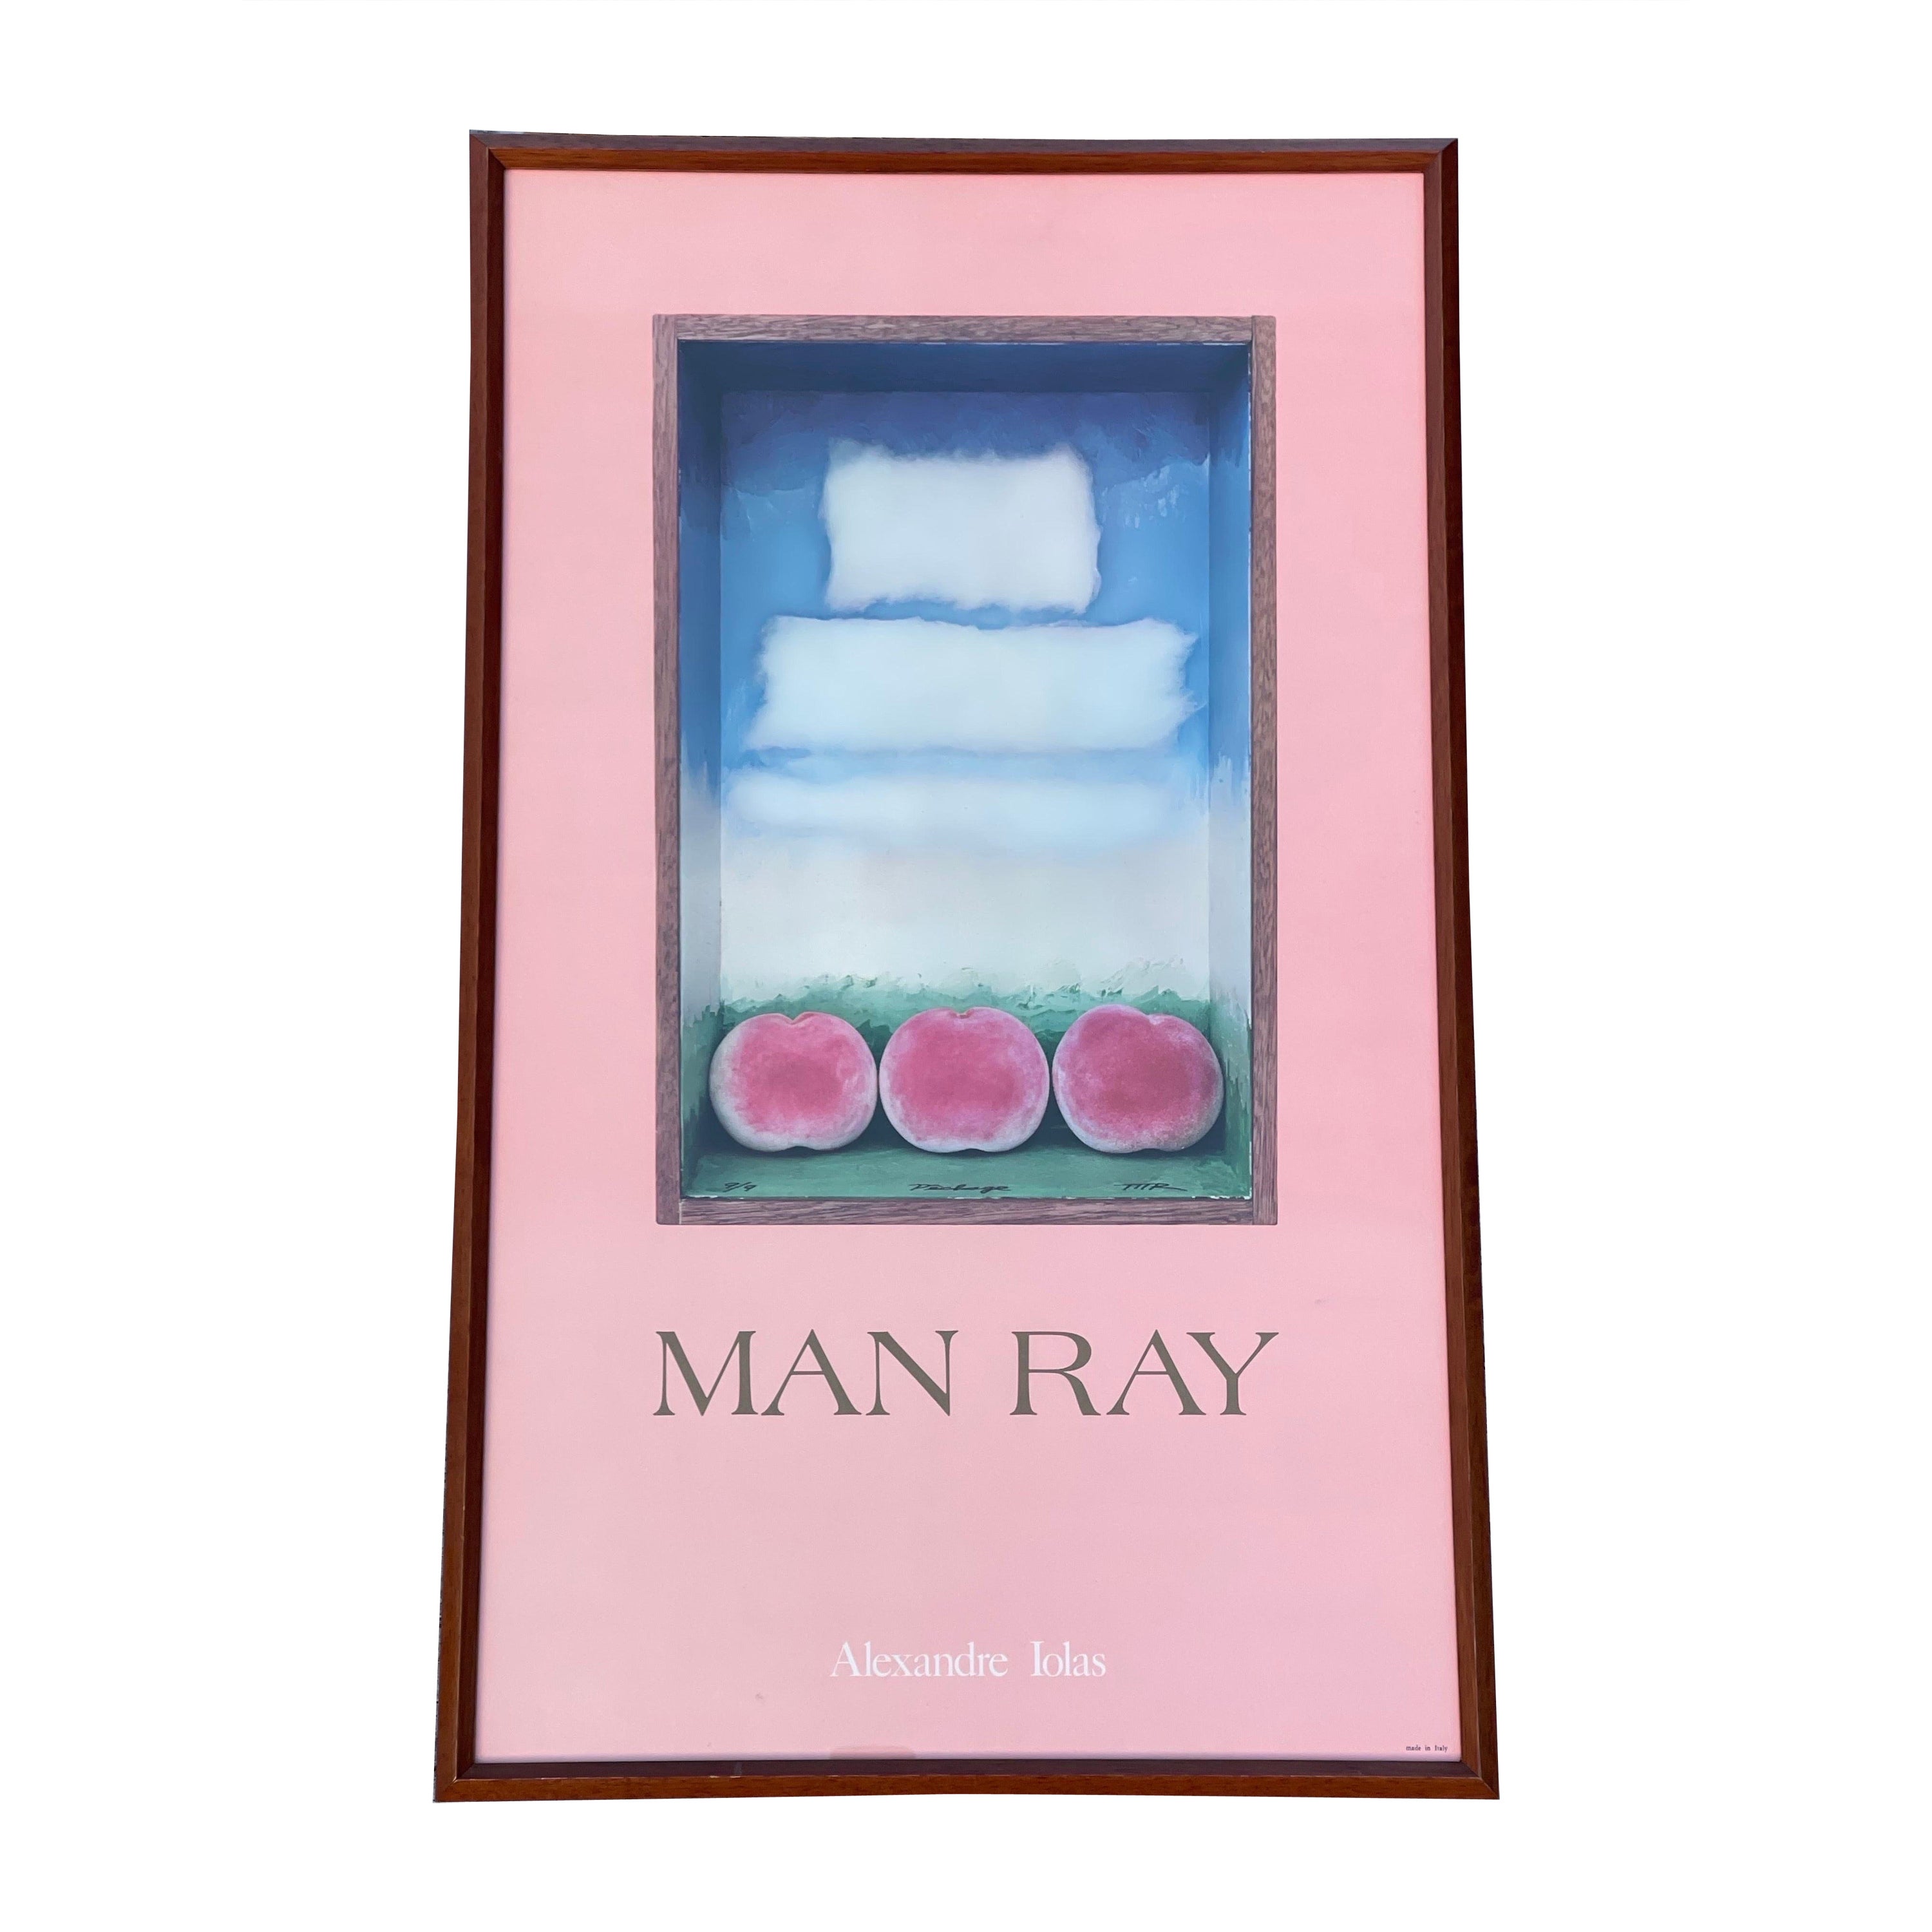 Man Ray at Alexandre Iolas Gallery Exhibition Lithograph Poster, Framed For Sale